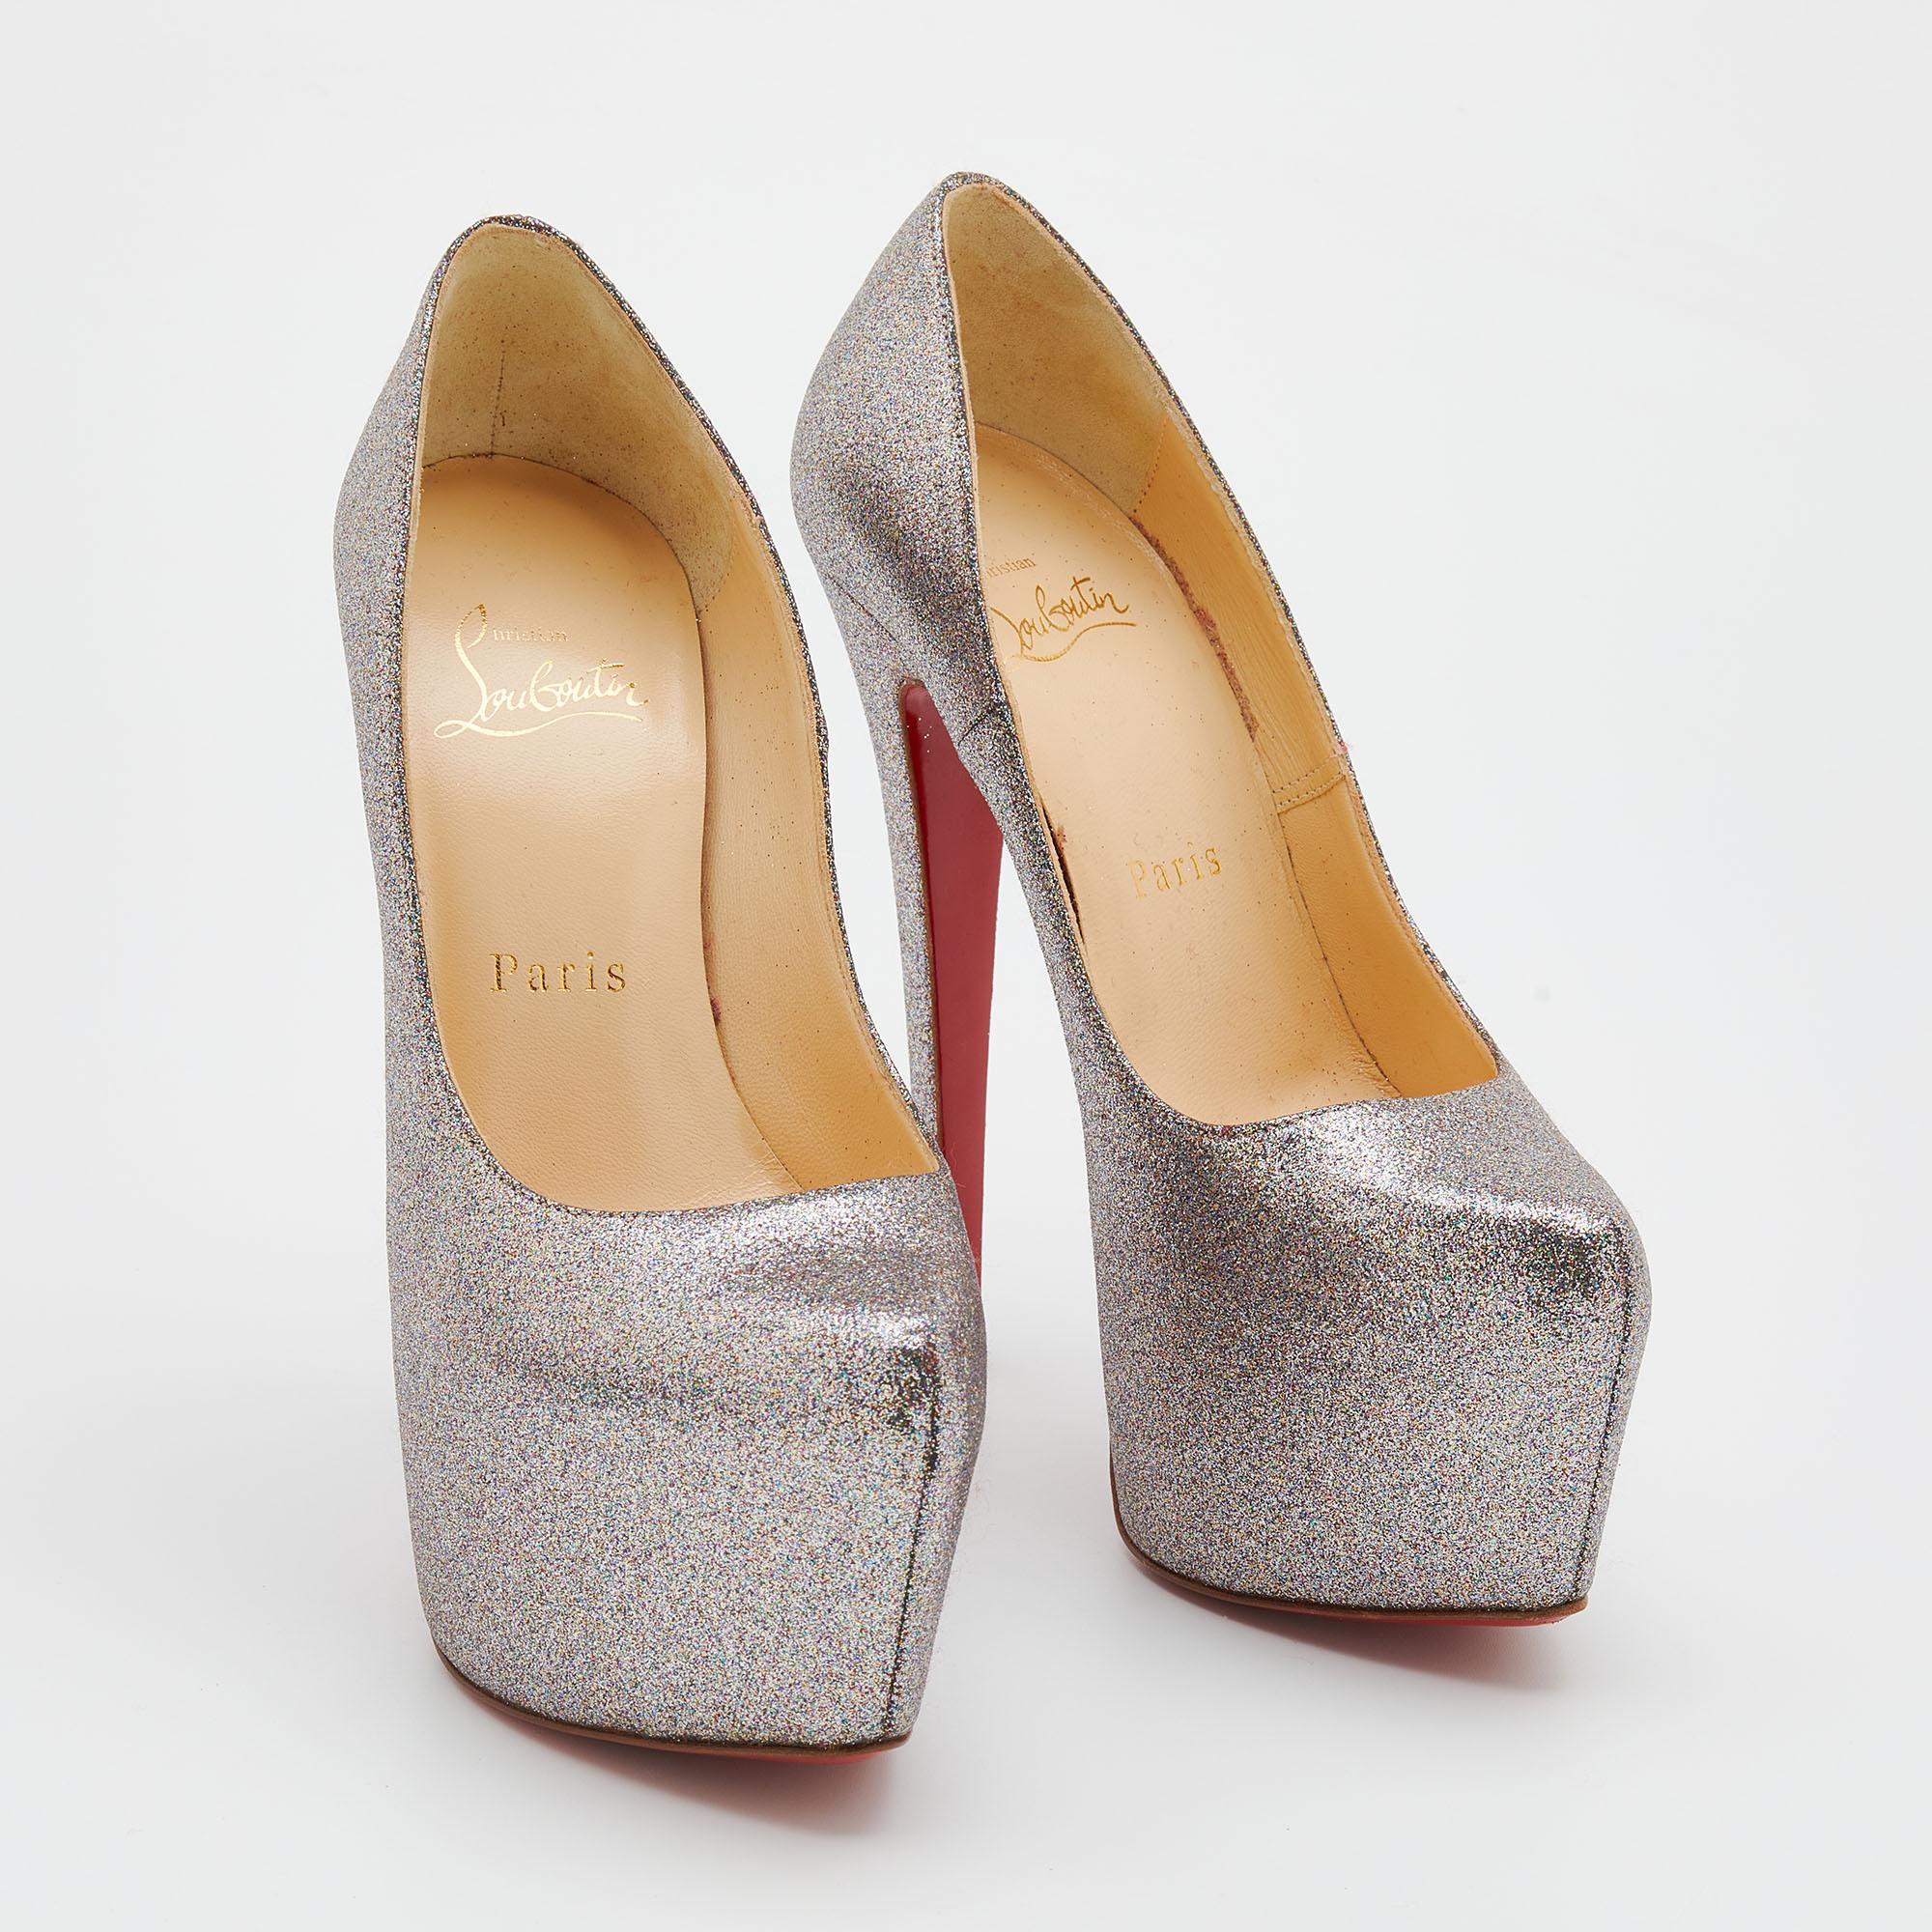 Take your love for Louboutins to new heights by adding this gorgeous pair to your collection. The stunning pumps are covered in glitter and elevated on platforms and 15 cm heels. The red soles add the signature finish that CL is loved for!

Includes